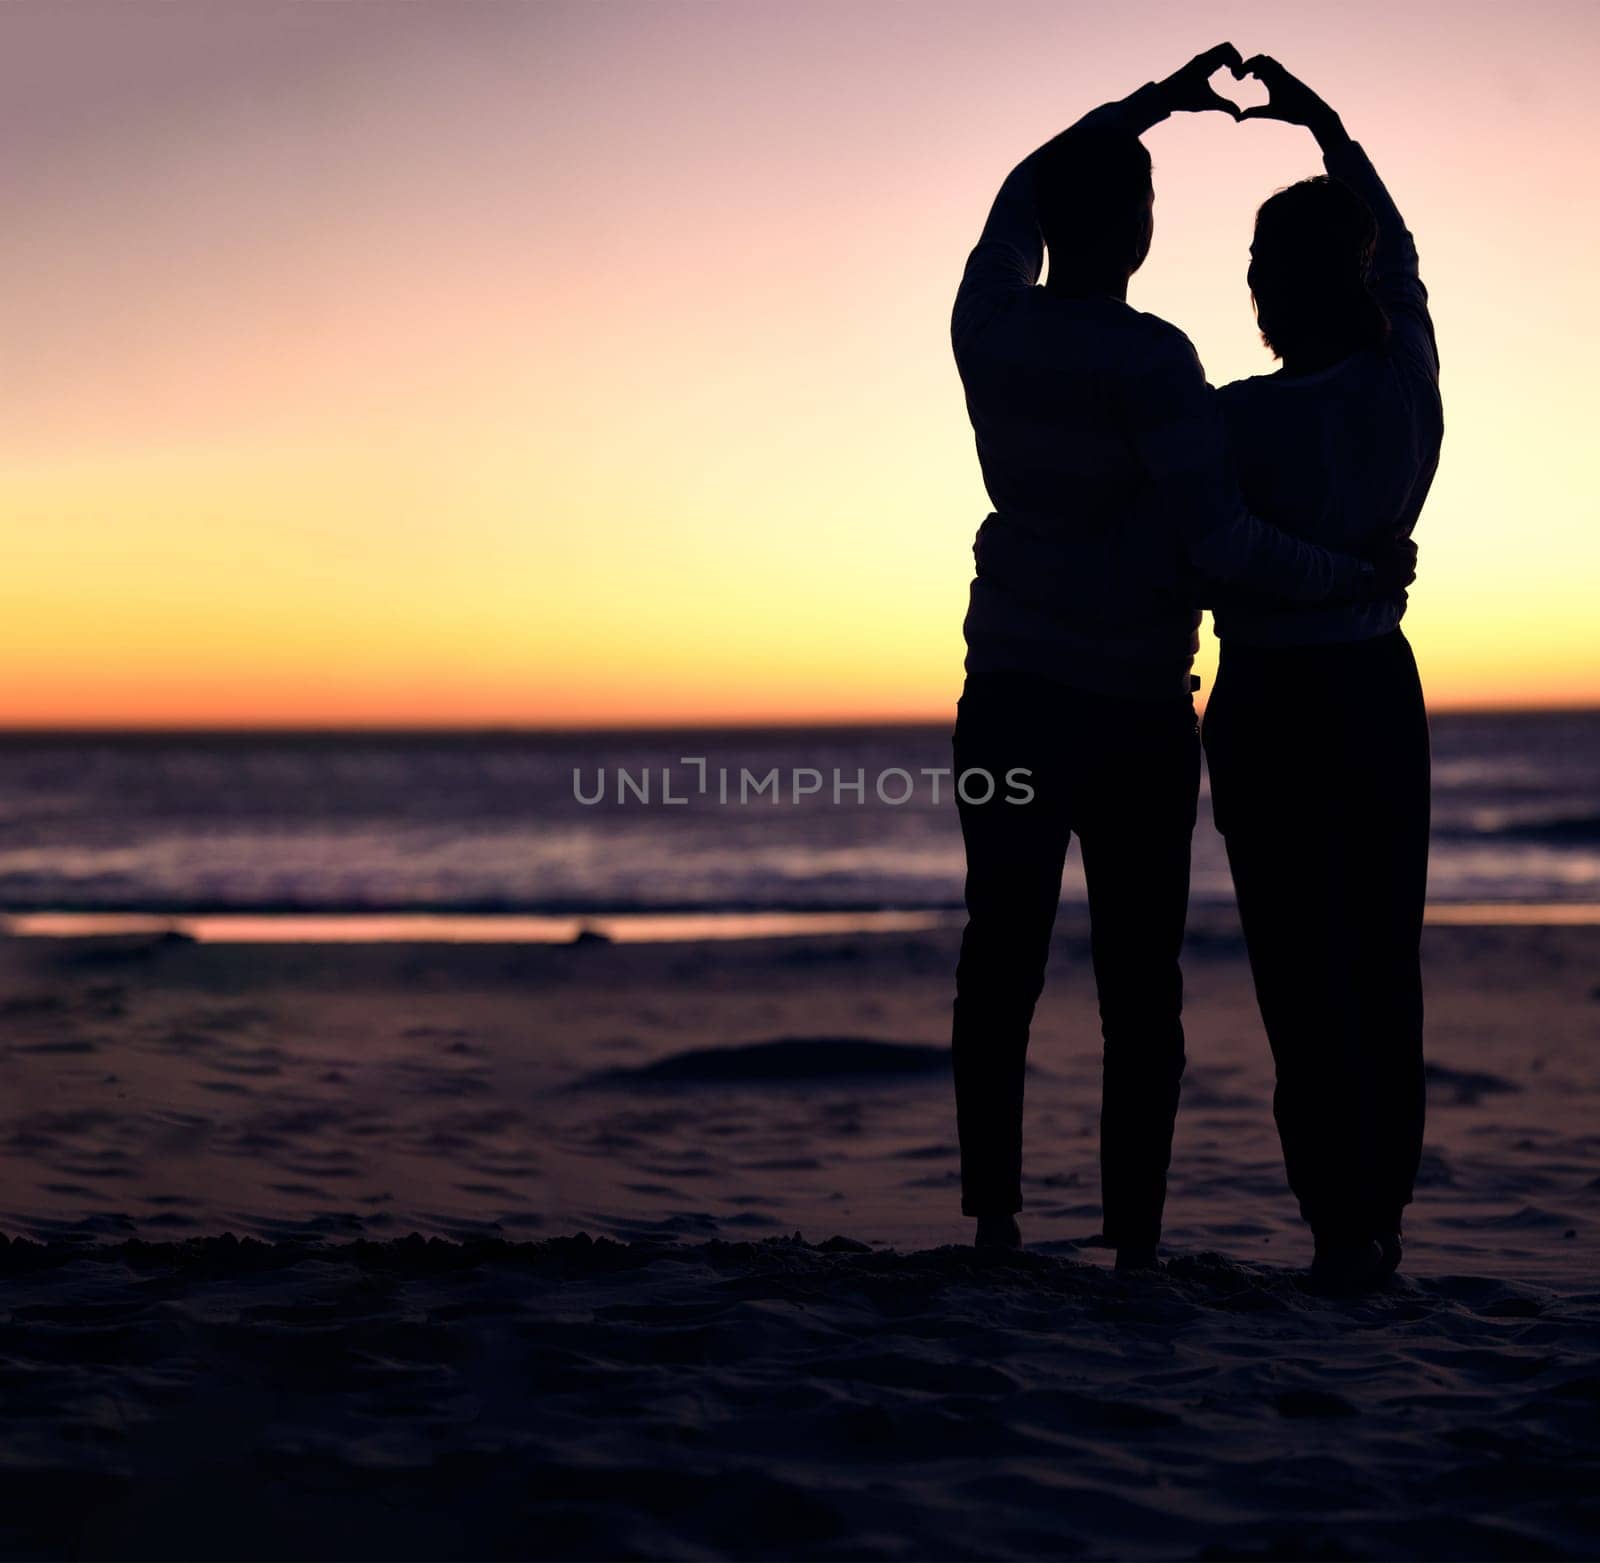 Couple, sunset silhouette and beach with heart sign hands, bonding and love on vacation for honeymoon. Man, woman and romantic hand signal by ocean with dusk sunshine for romance together in nature by YuriArcurs